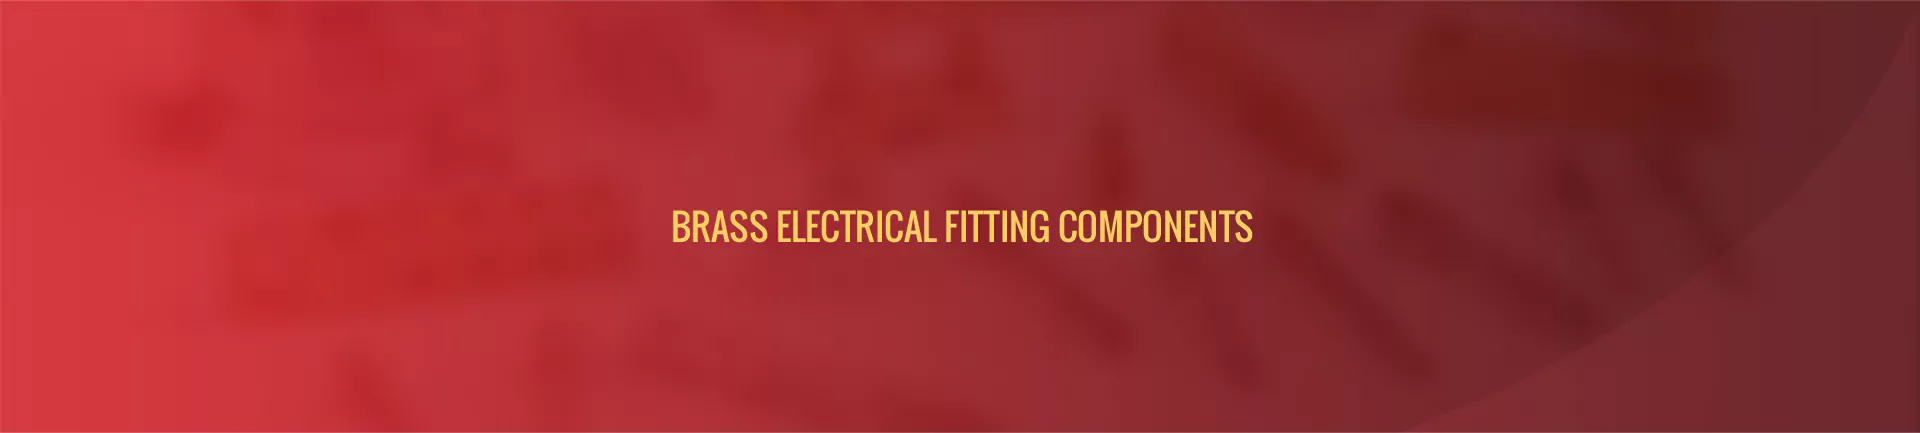 brass-electrical-fitting-components-banner